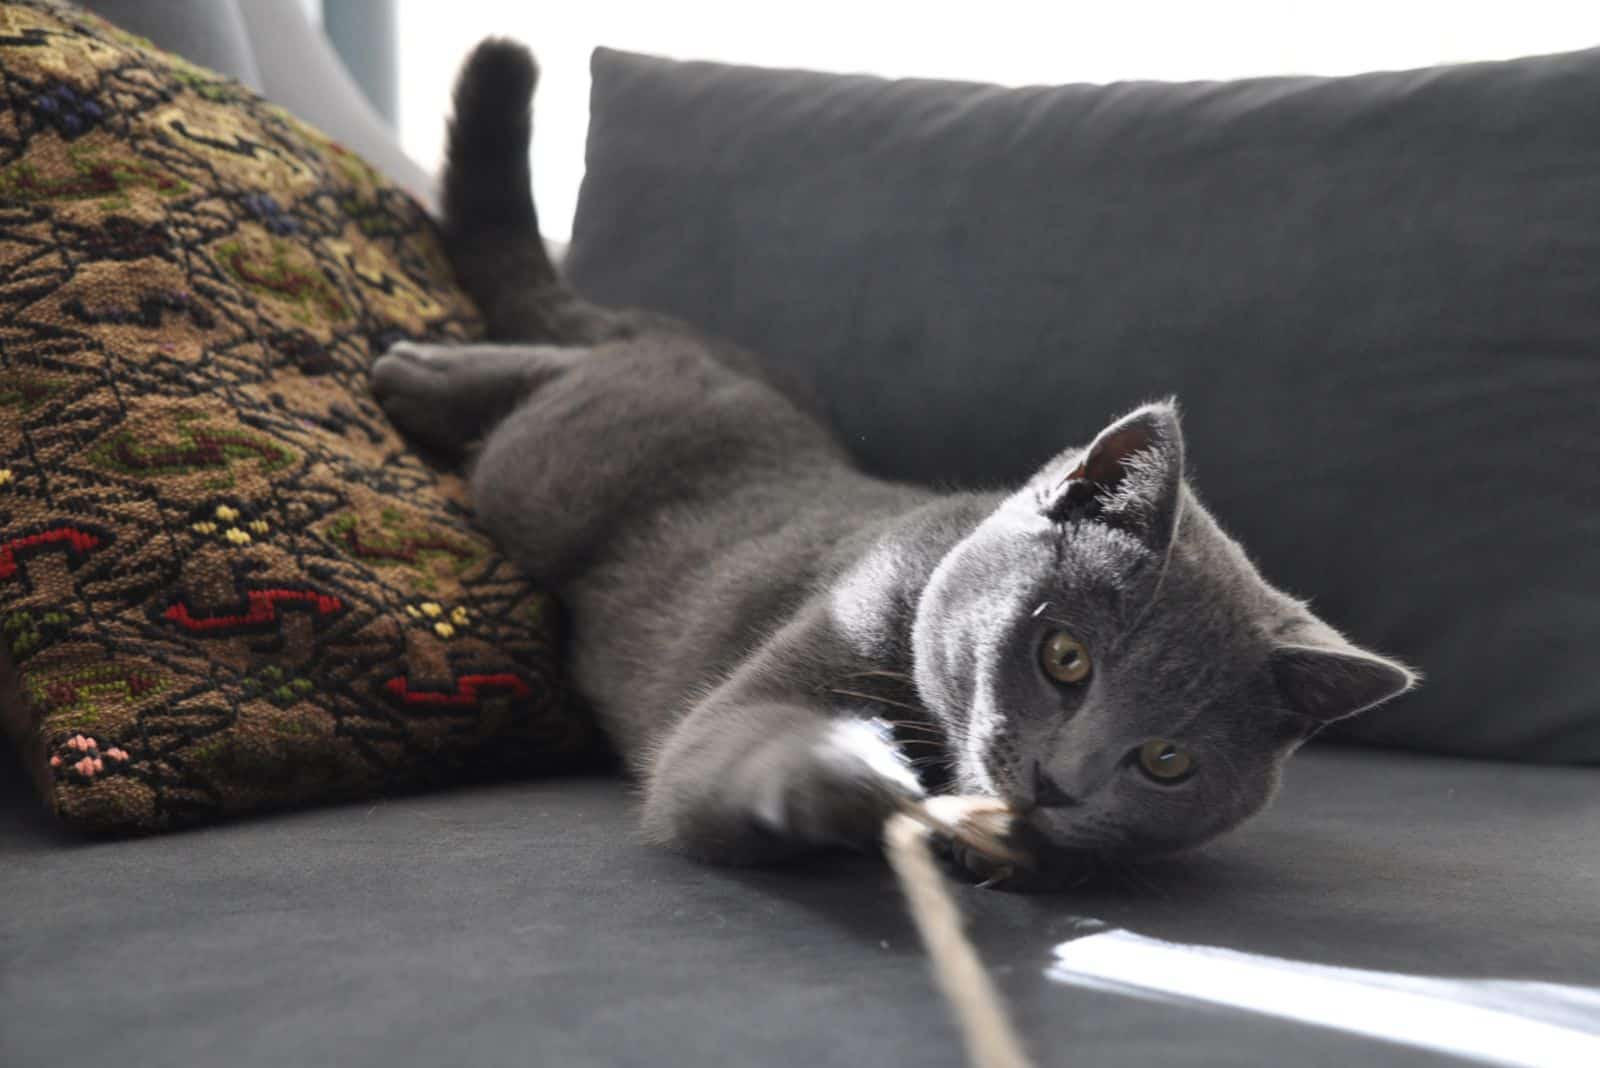 photo of a cat playing on a couch